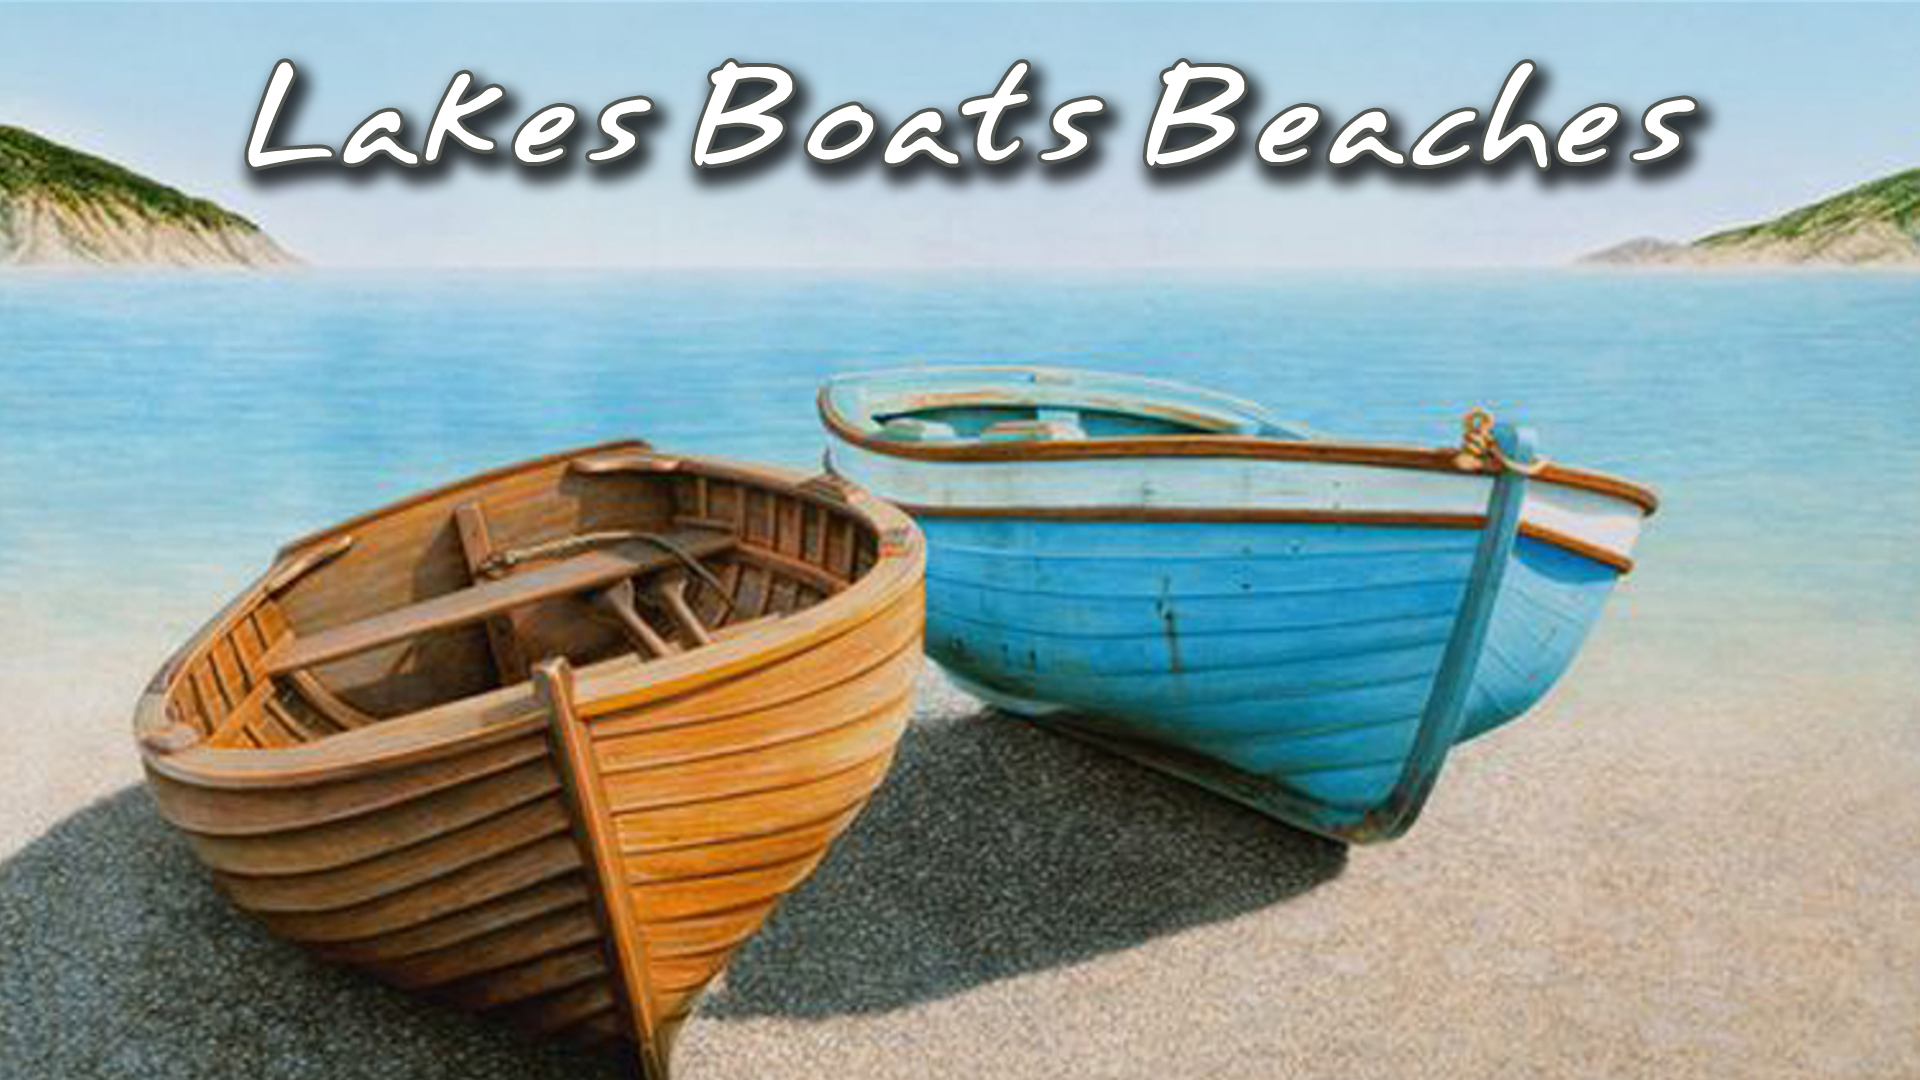 Lakes Boats Beaches – Rubbing shoulders with the riffraff